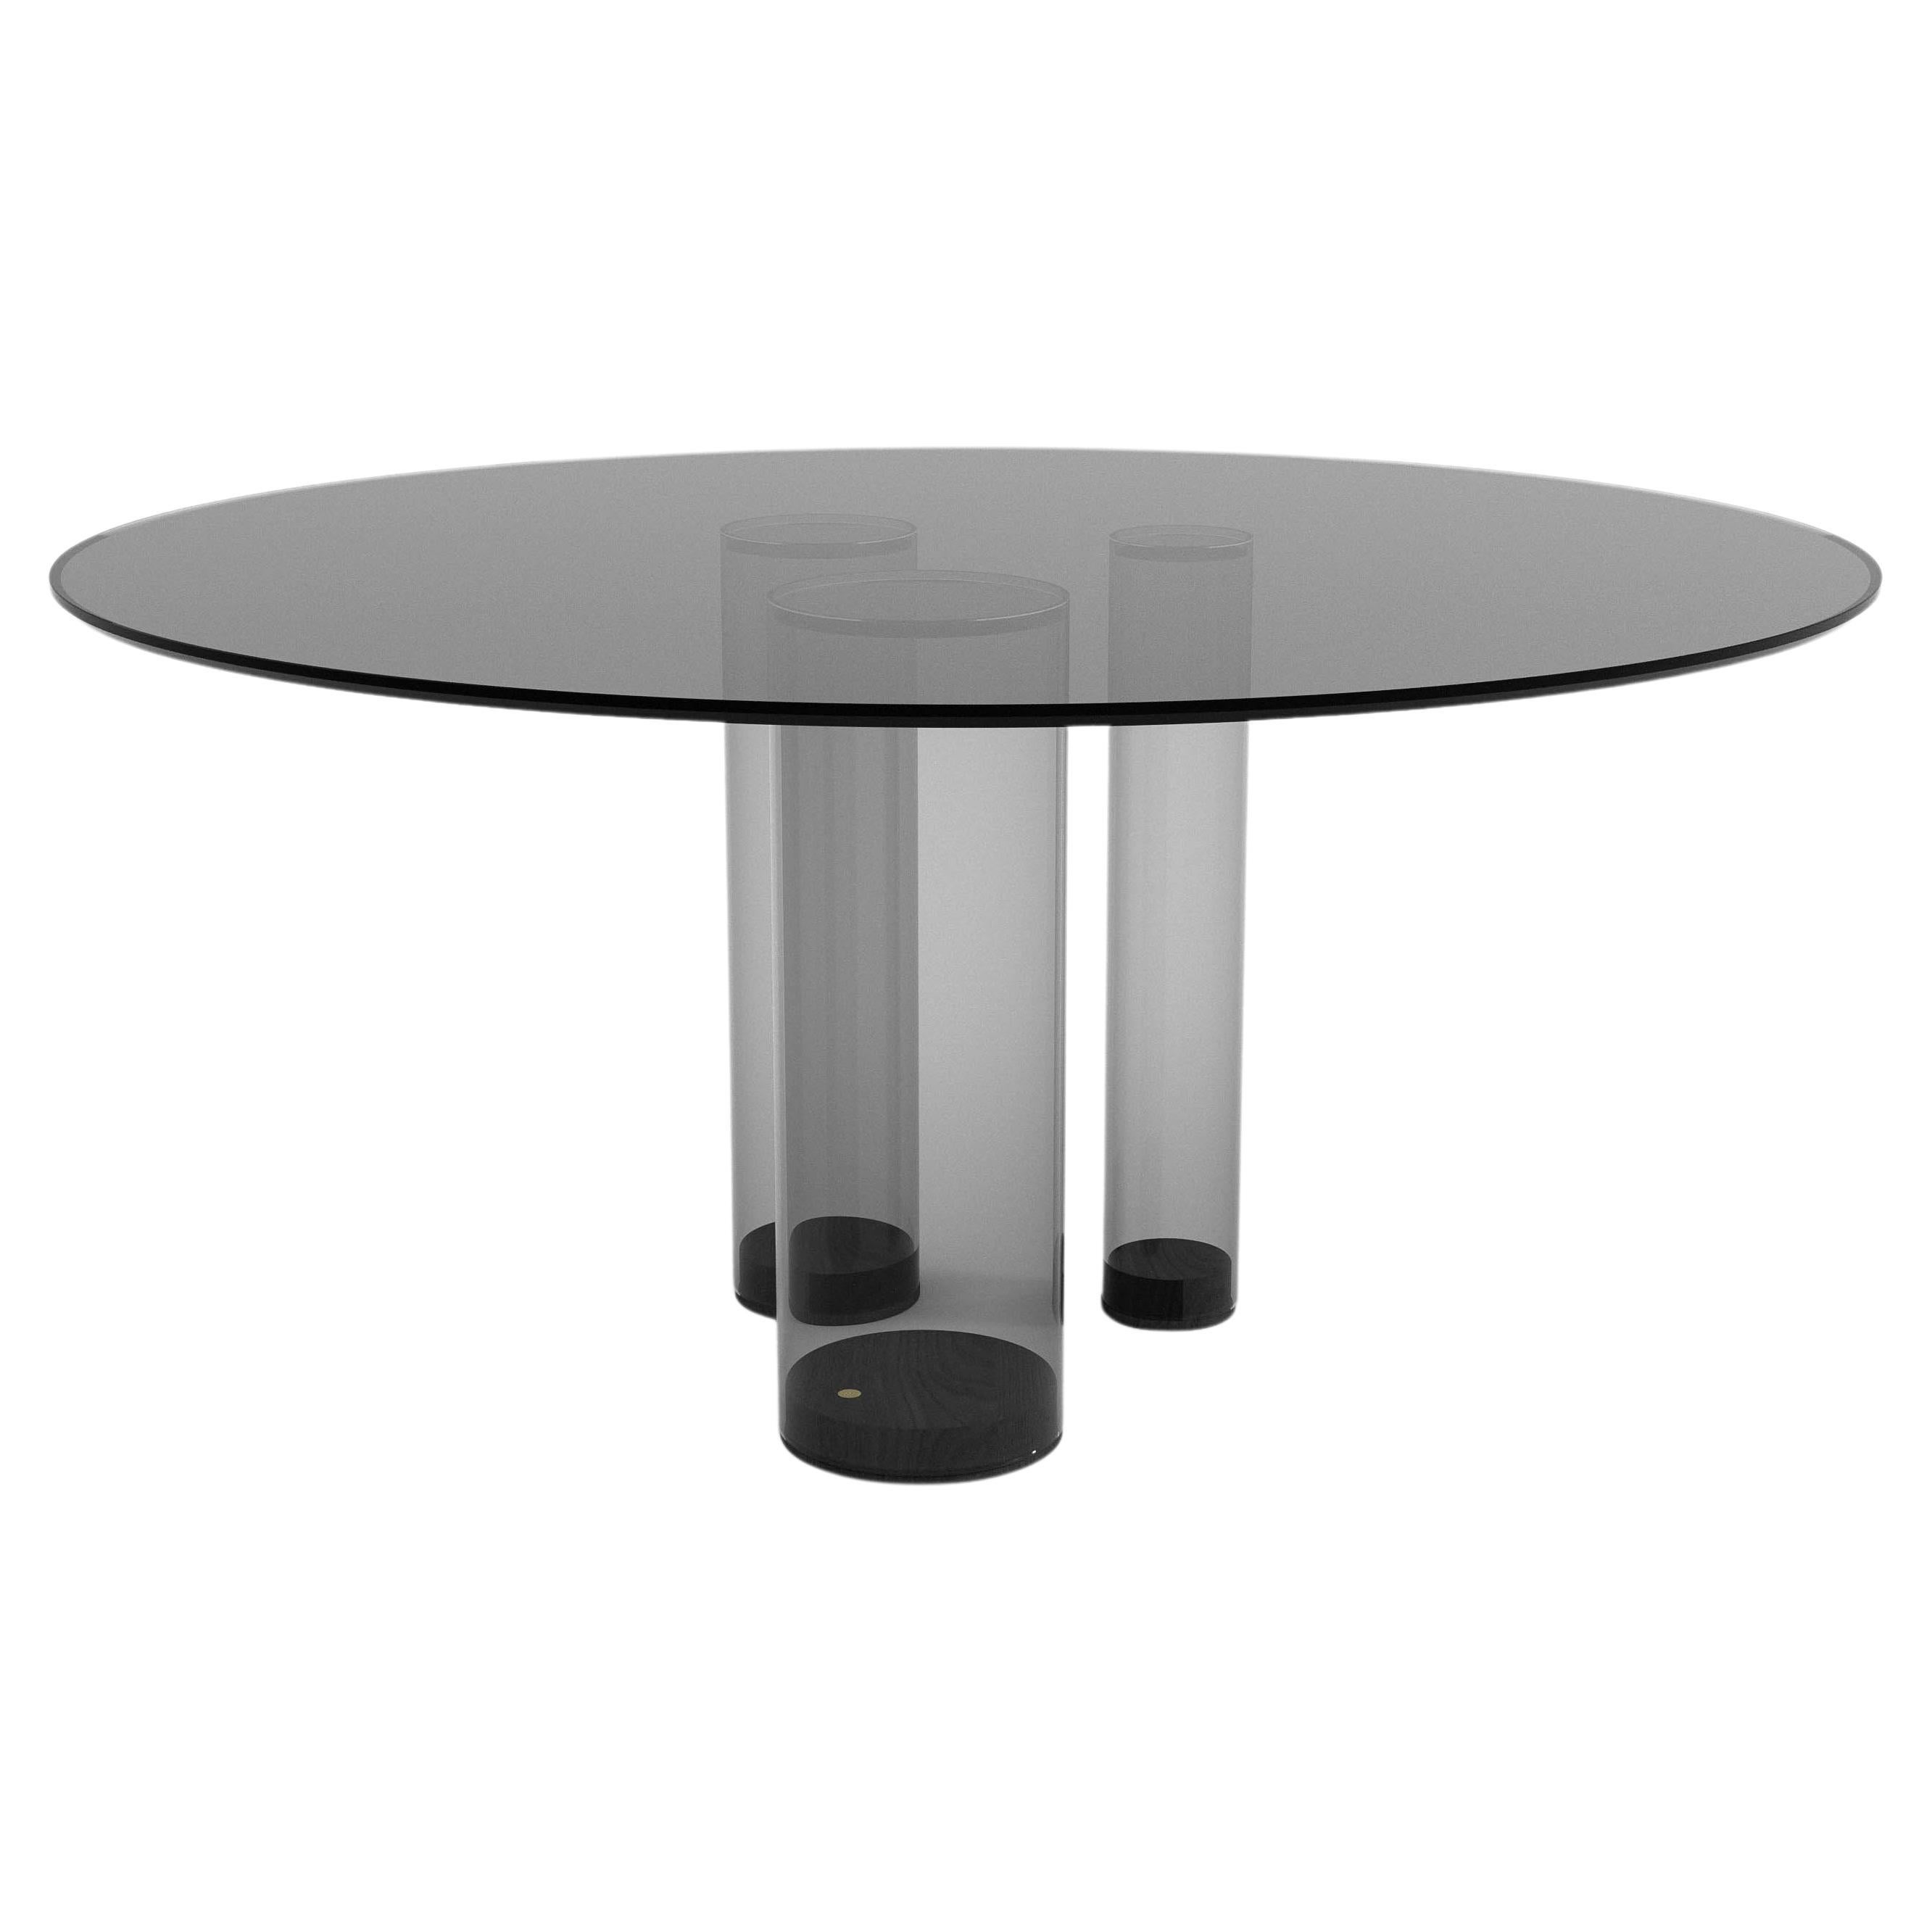 Contemporary round dining table, black glass & black oak wood, Belgian design For Sale